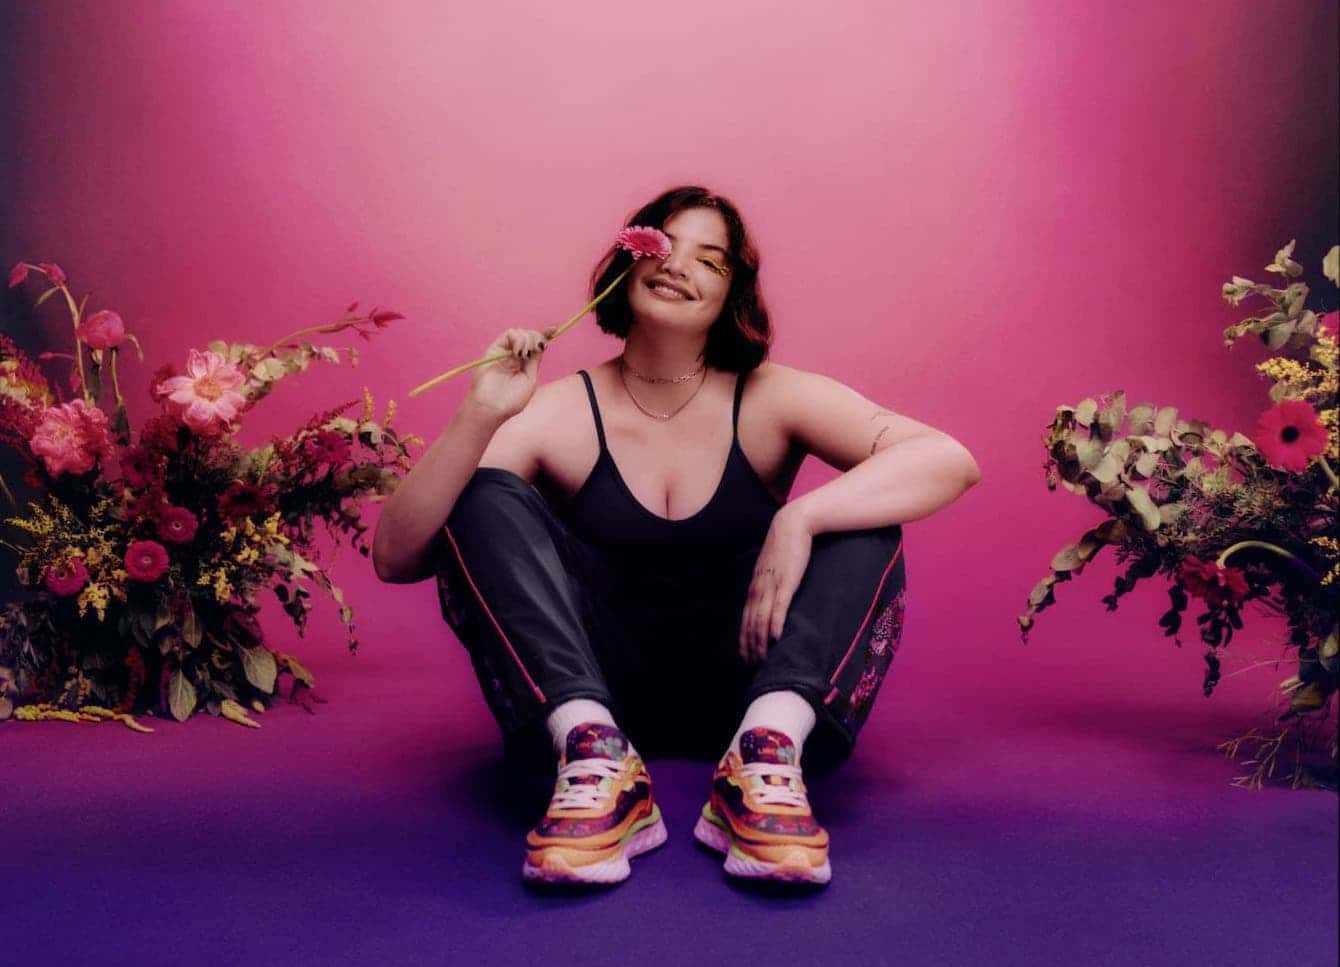 Iconic department store liberty collaborate with puma to celebrate strong women